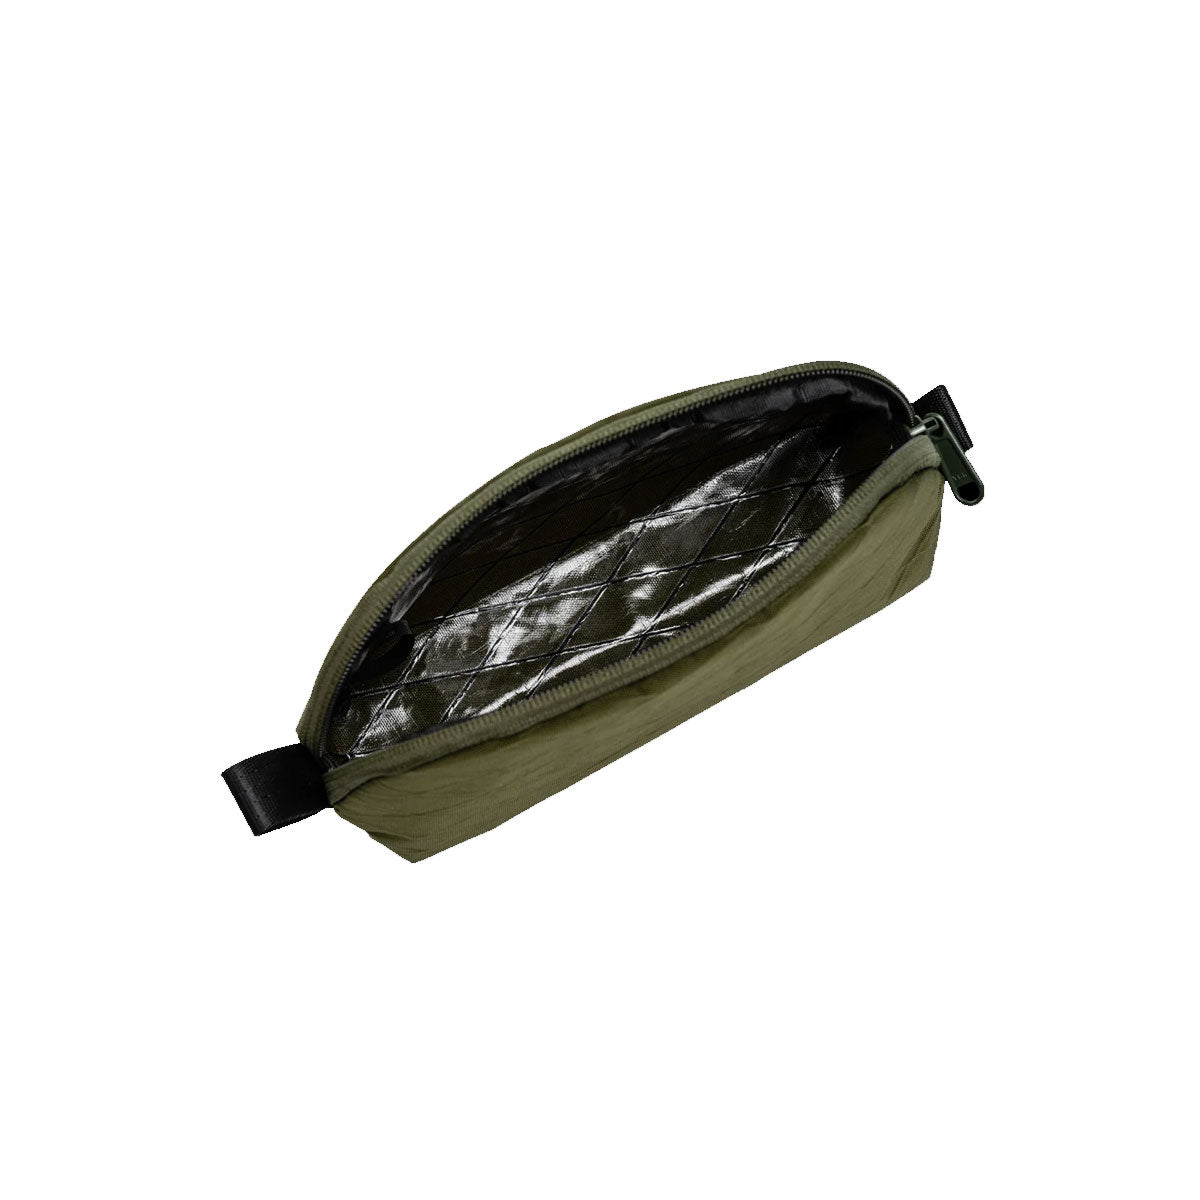 [PO] Able Carry : The Daily Stash Pouch : X-Pac Olive Green (X42)